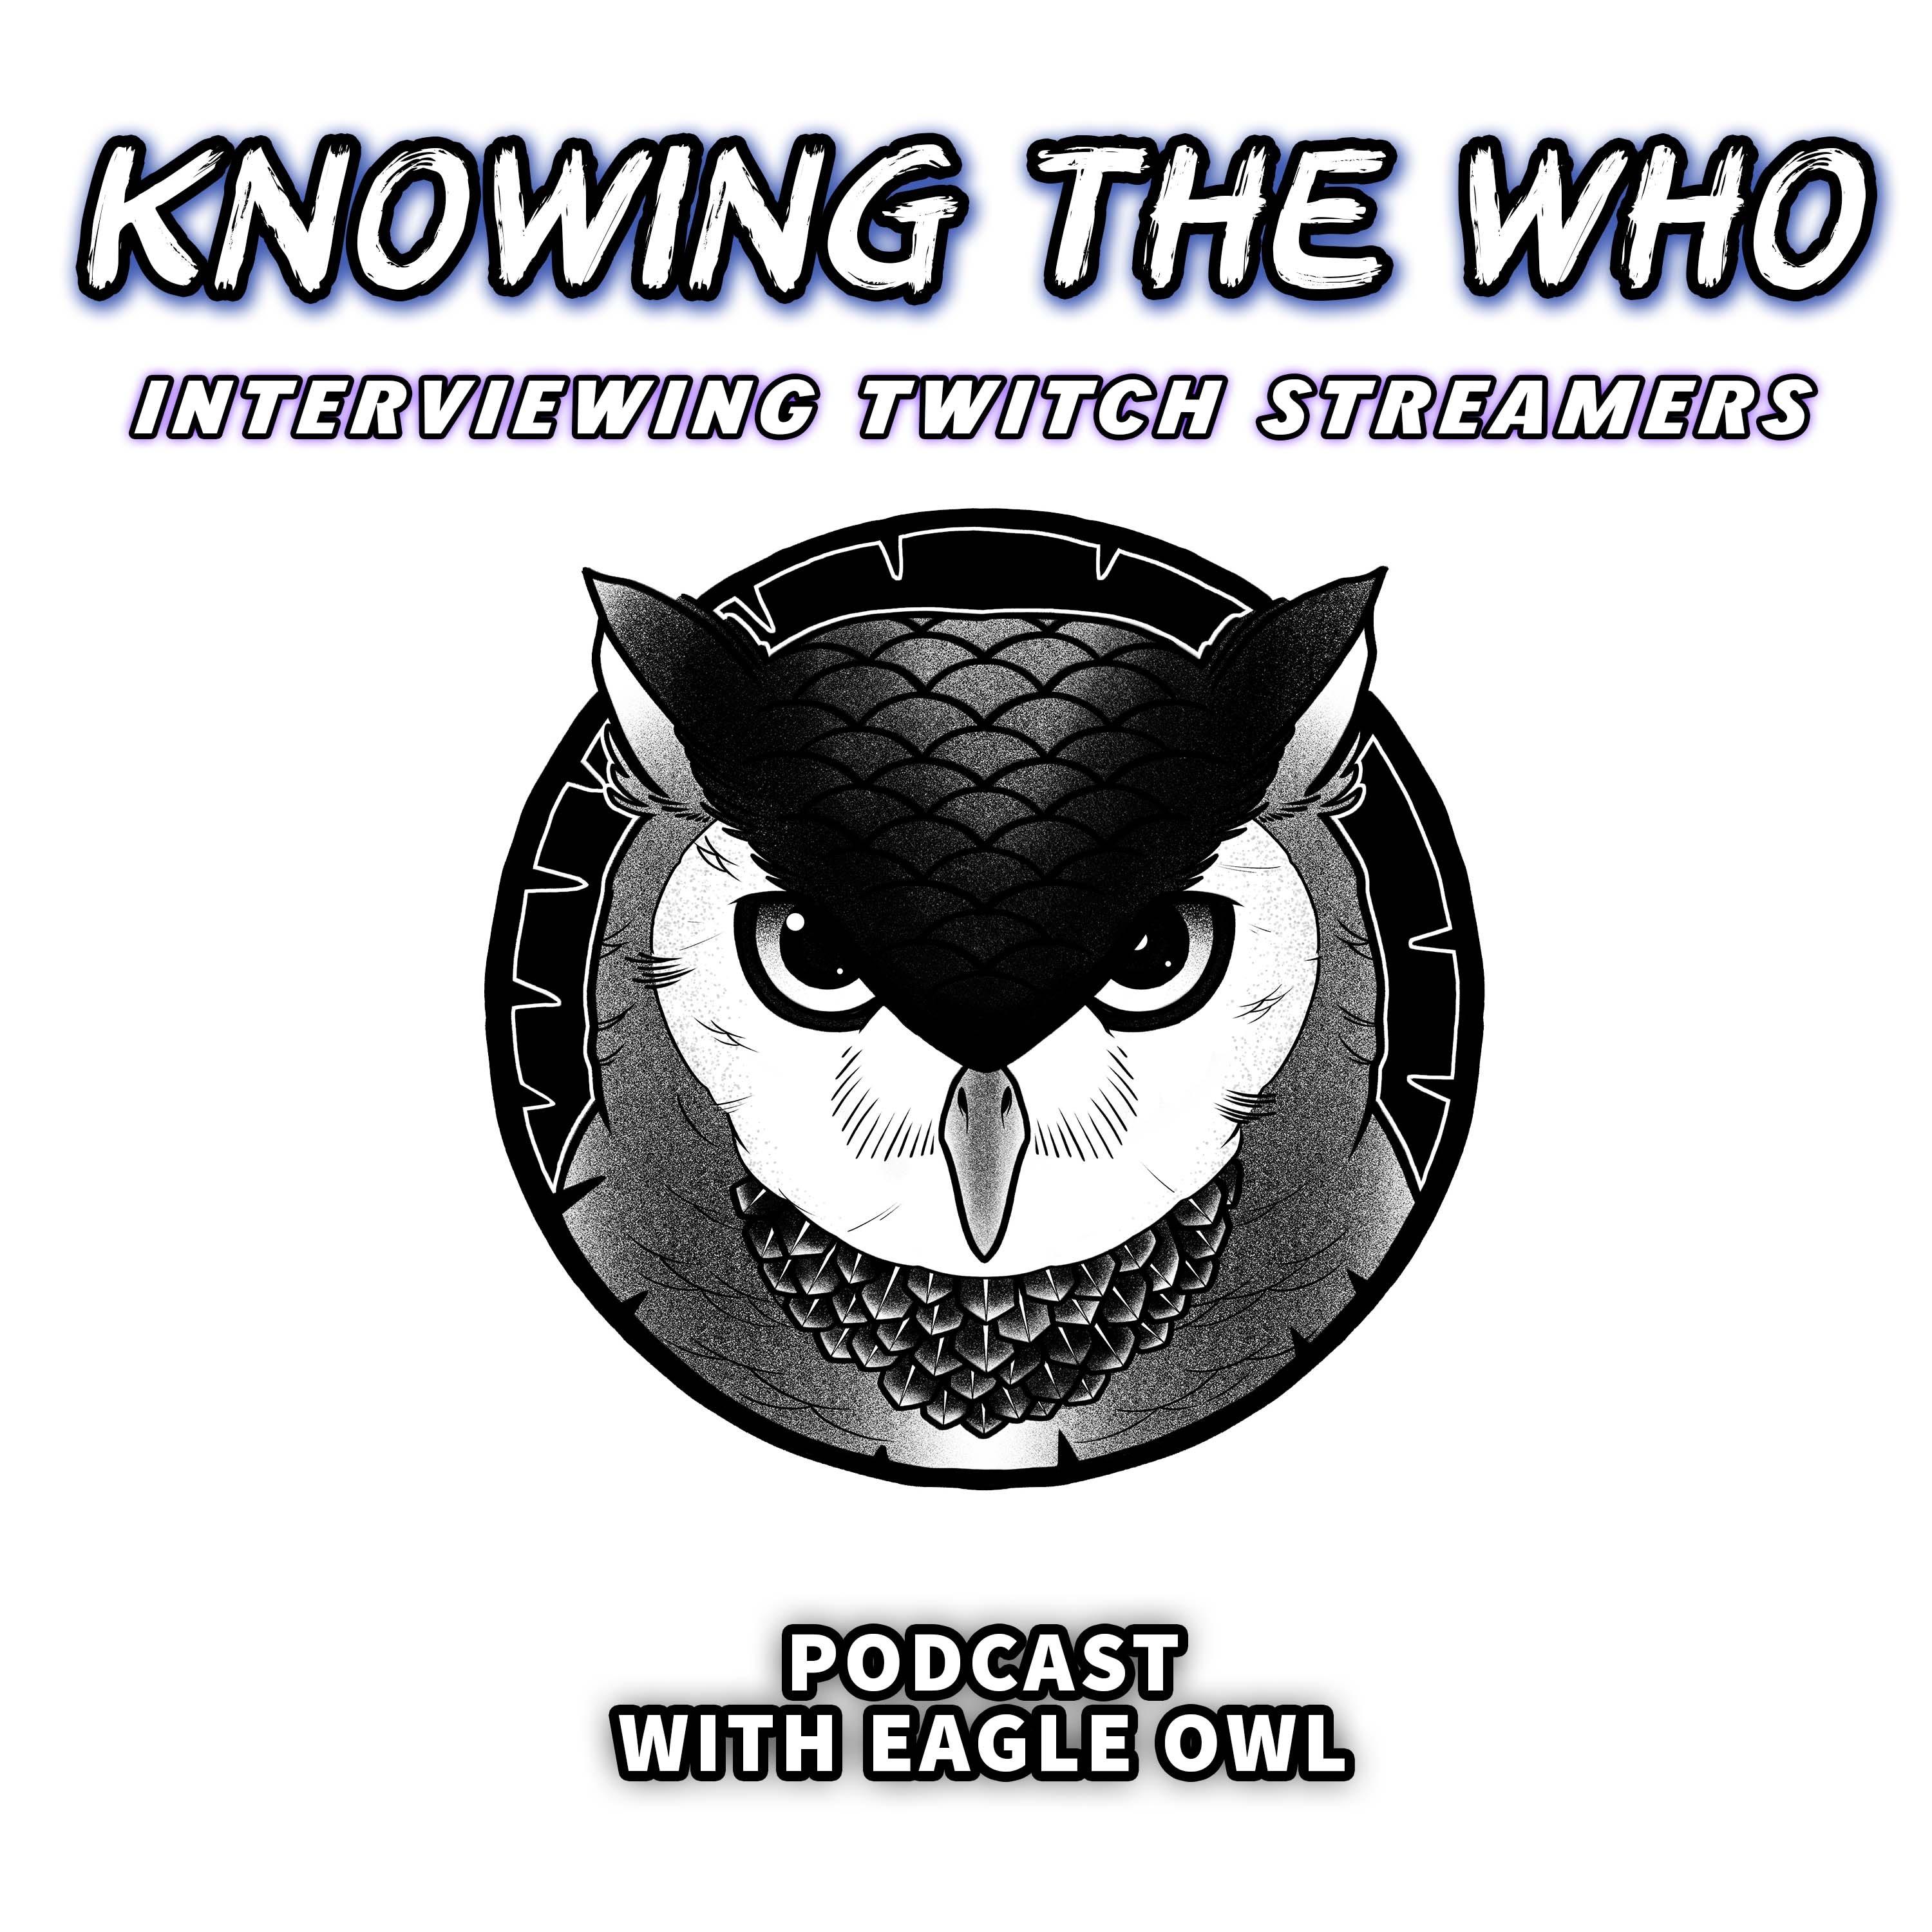 Knowing The Who